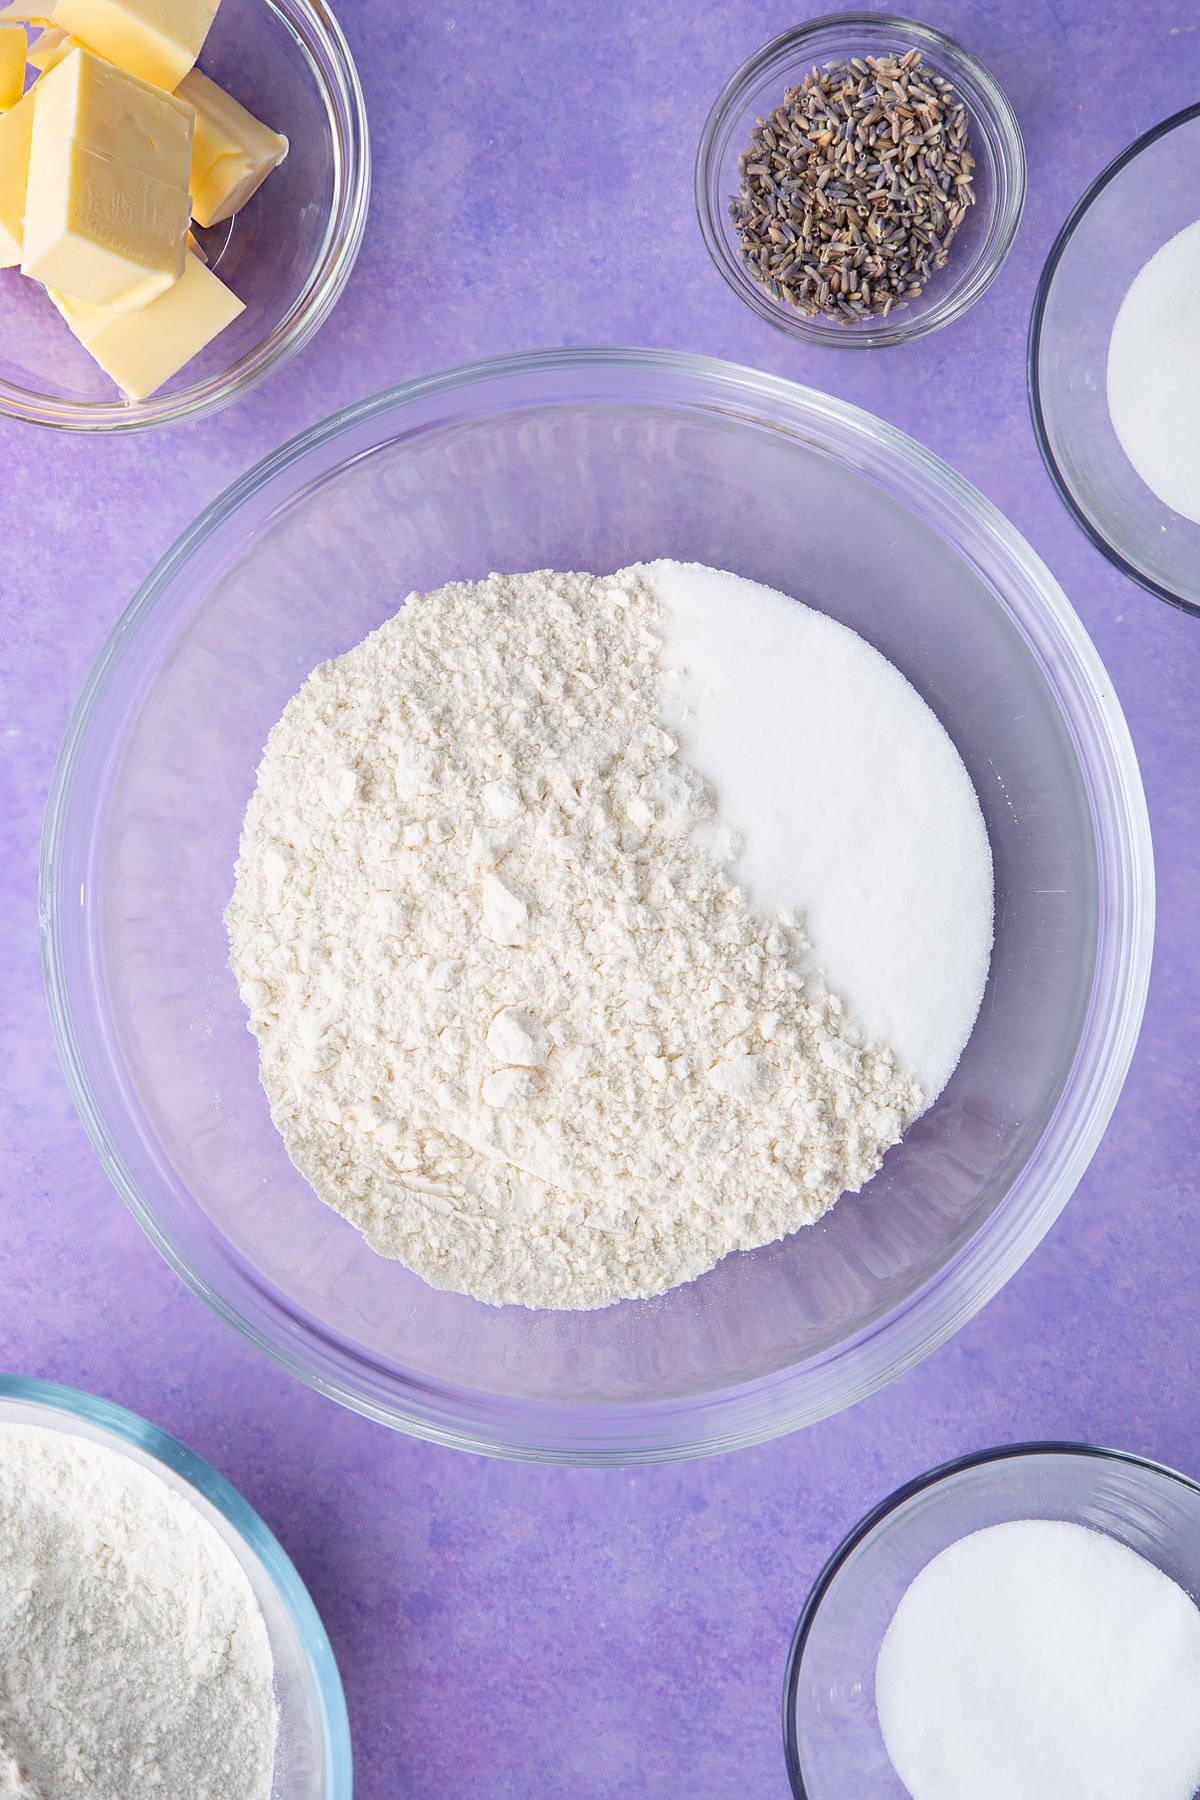 Flour and sugar in a bowl. Ingredients to make lavender shortbread cookies.